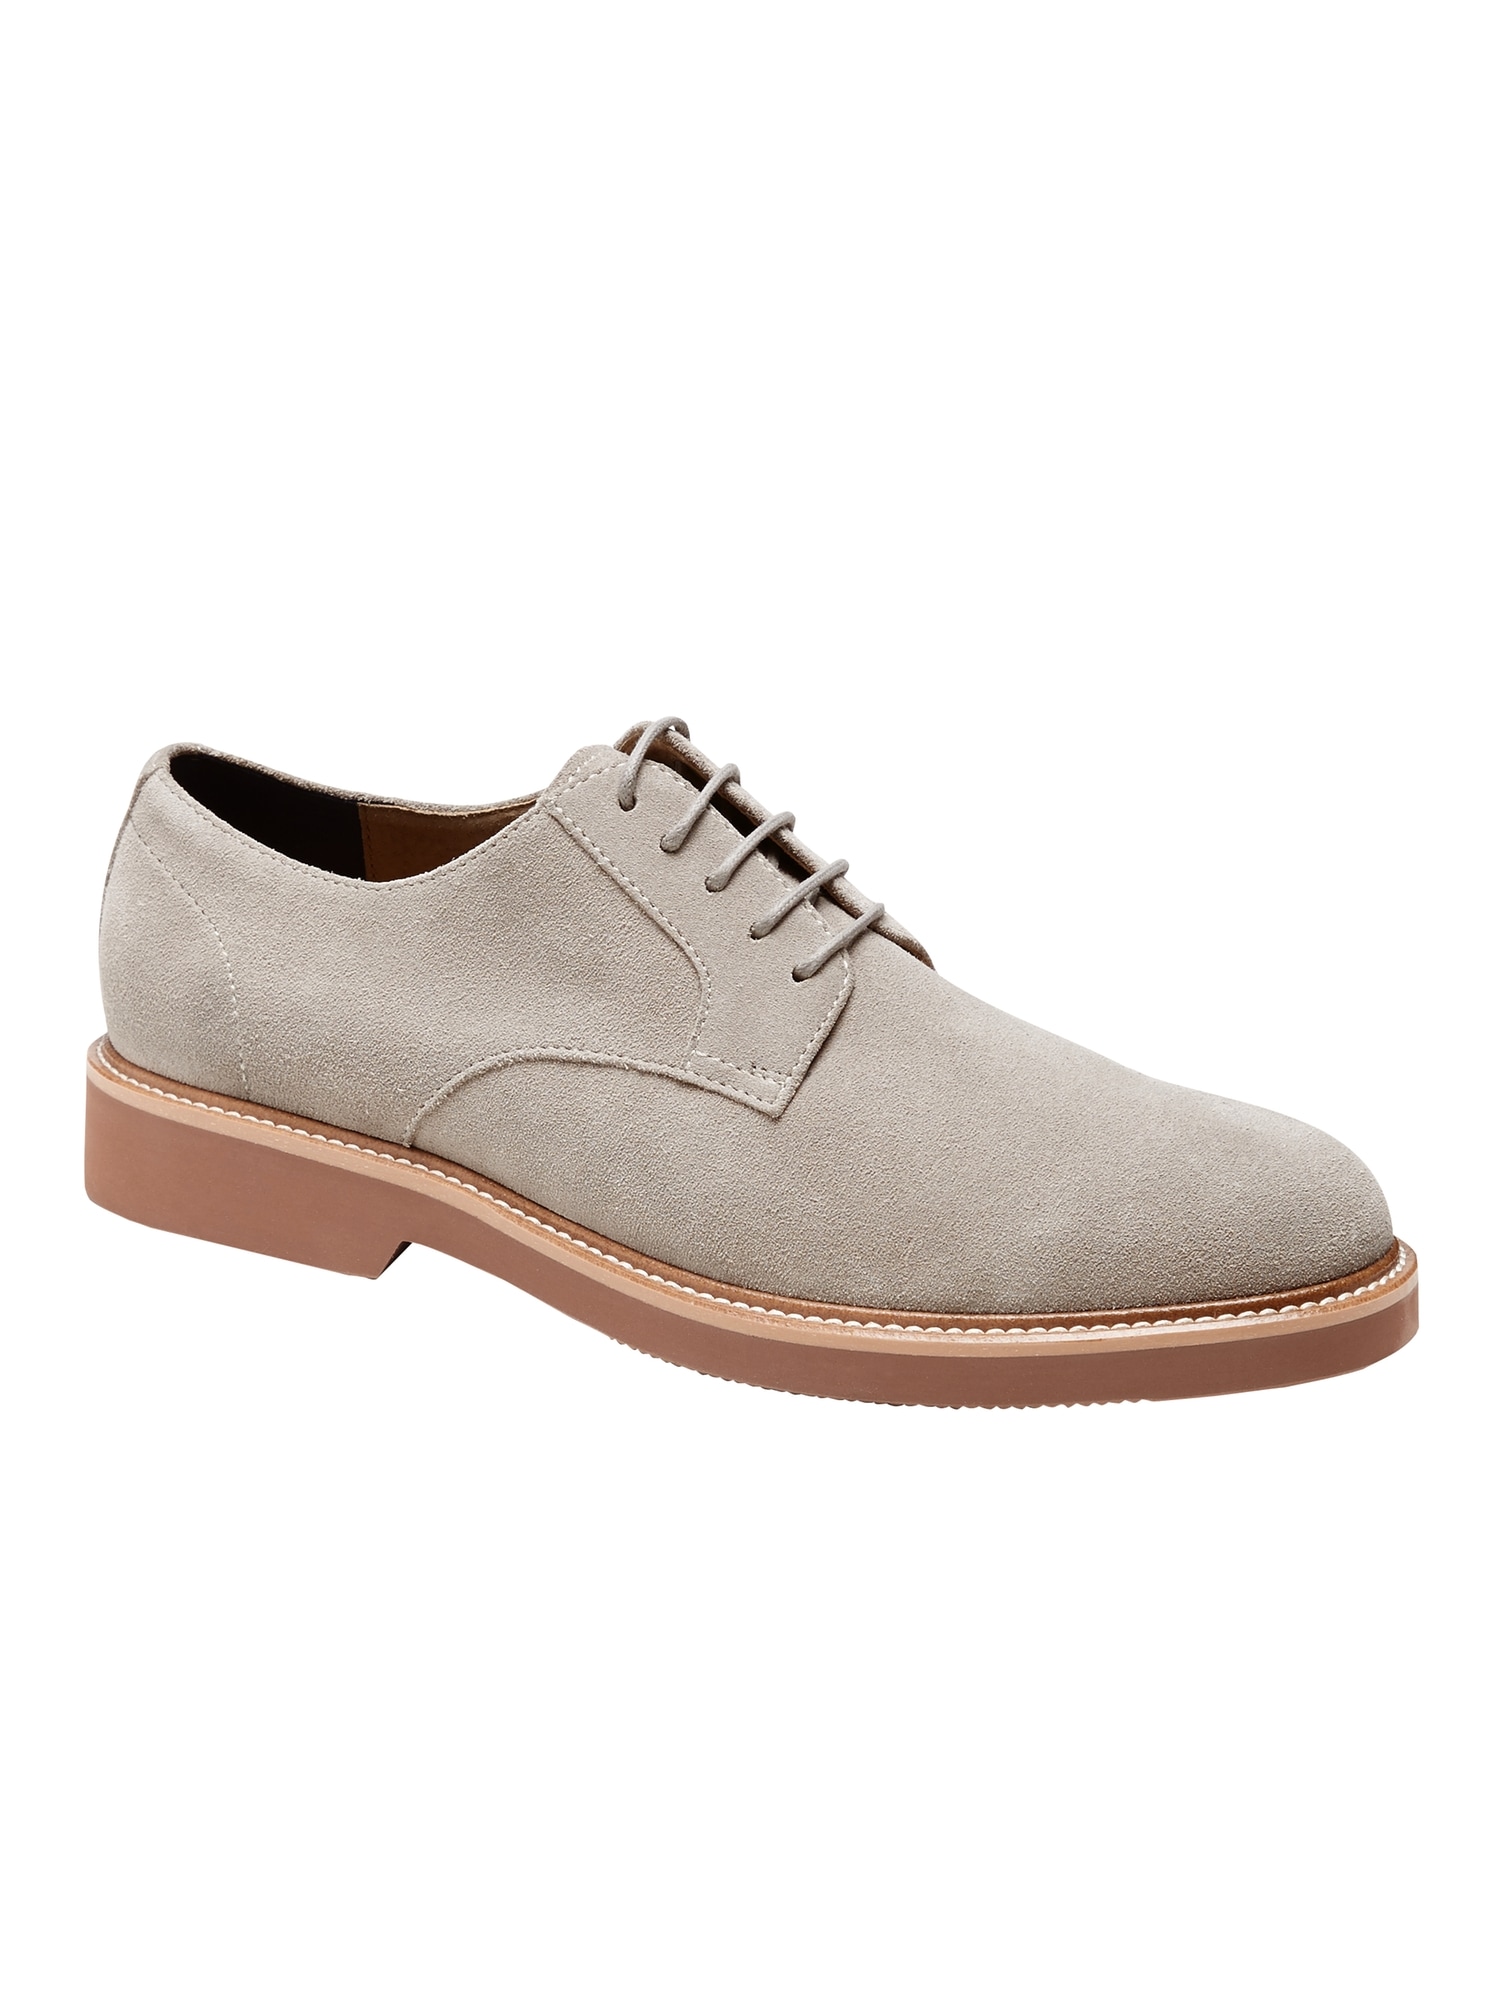 Nyle Suede Lace-Up Oxford